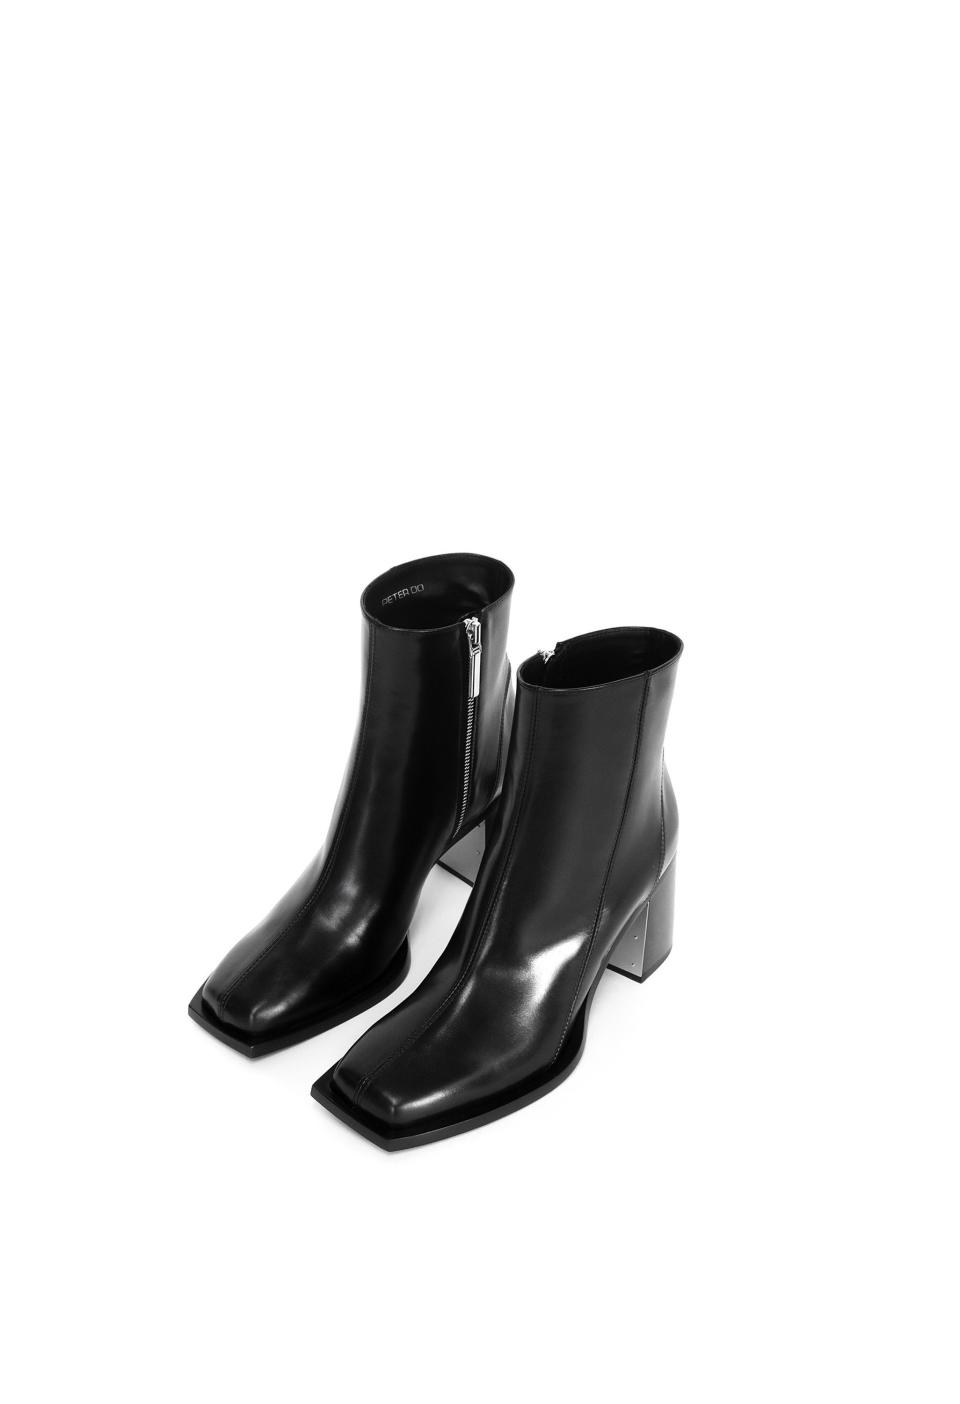 21) Black Everyday Leather Boot